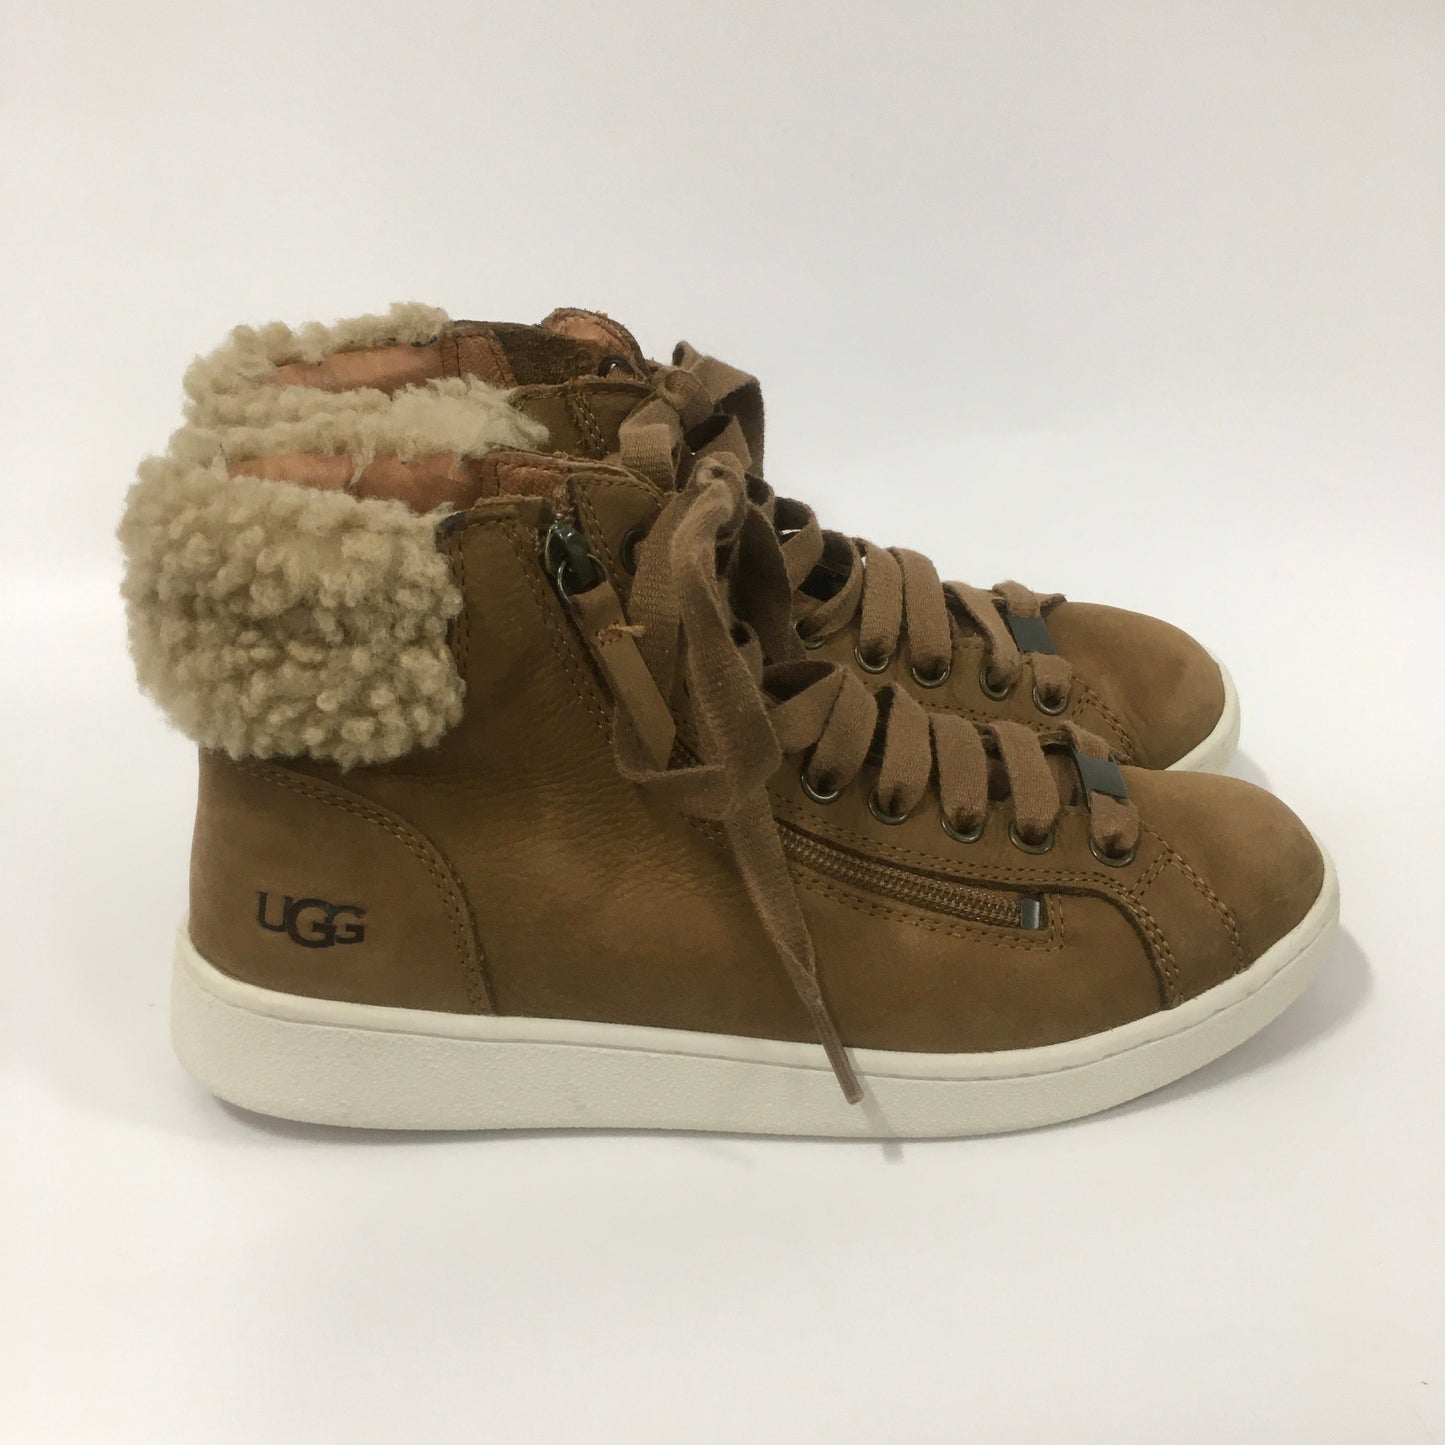 Tan Shoes Sneakers Ugg, Size 7.5